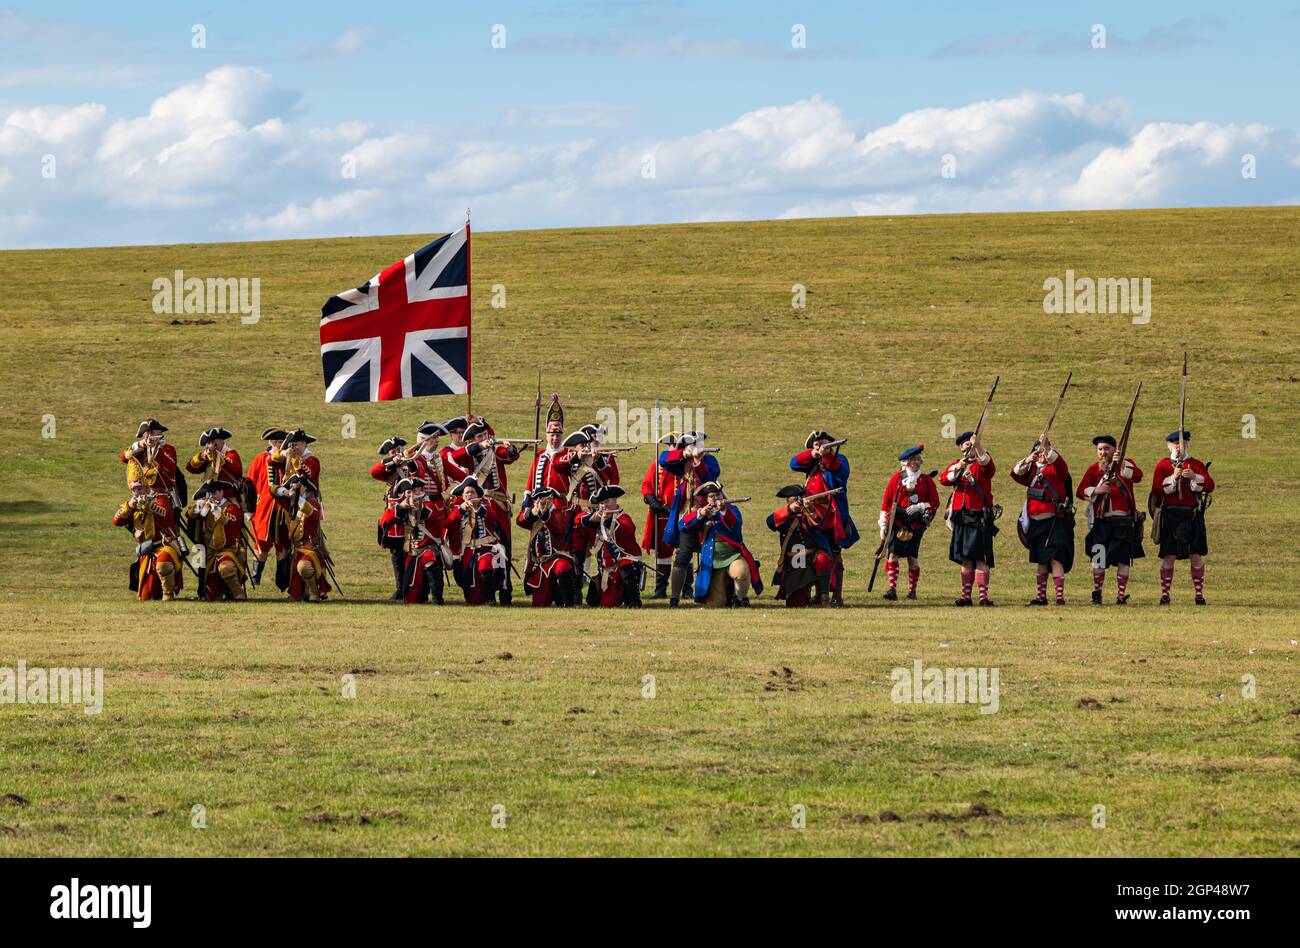 Hanoverian redcoat soldiers in period costume with Union Jack flag in re-enactment of Battle of Prestonpans, East Lothian, Scotland, UK Stock Photo